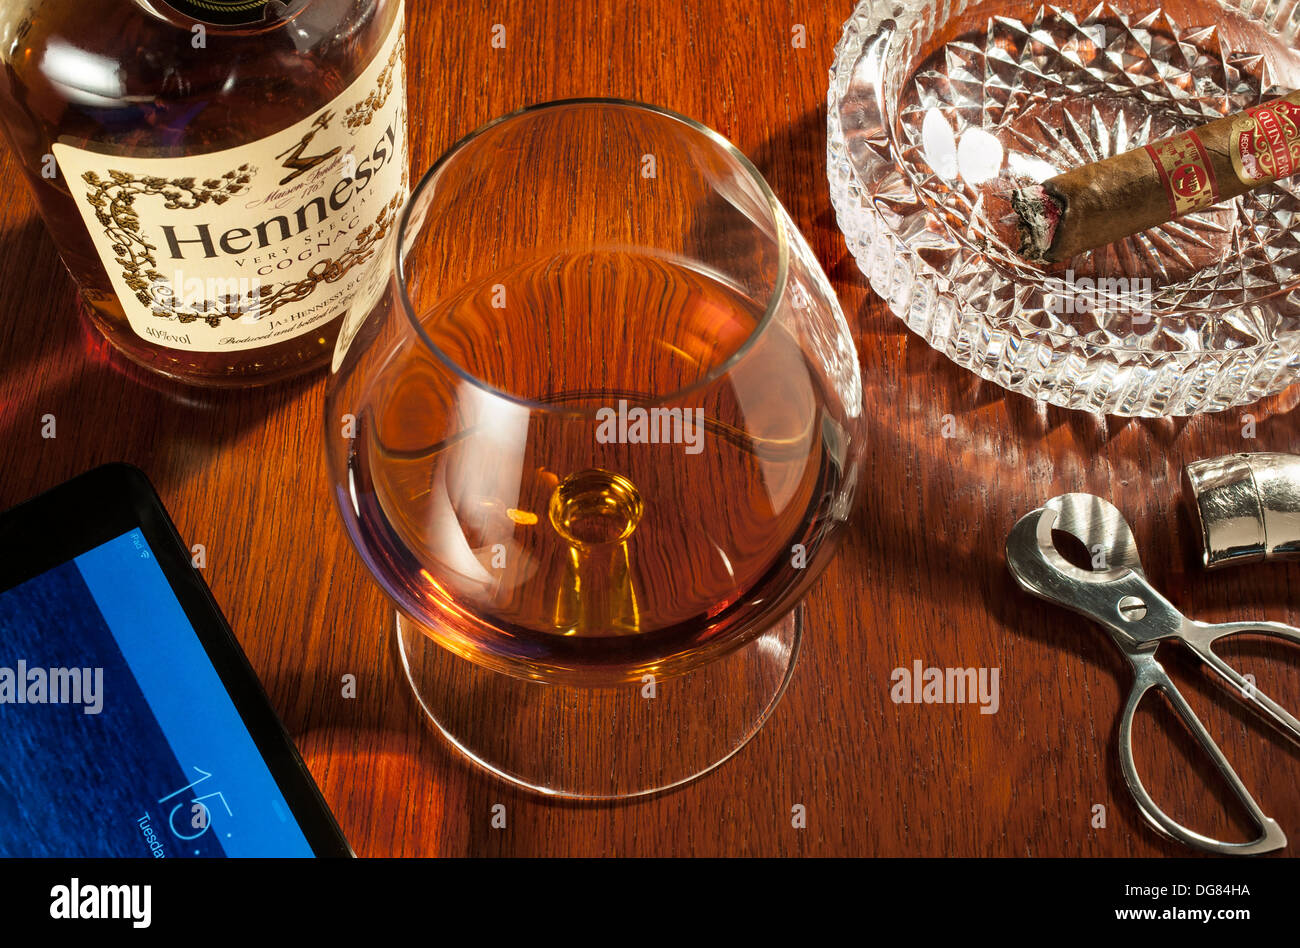 Brandy and cigars - A snifter glass of Hennessy brandy with a part smoked cigar in ashtray and an iPad Stock Photo